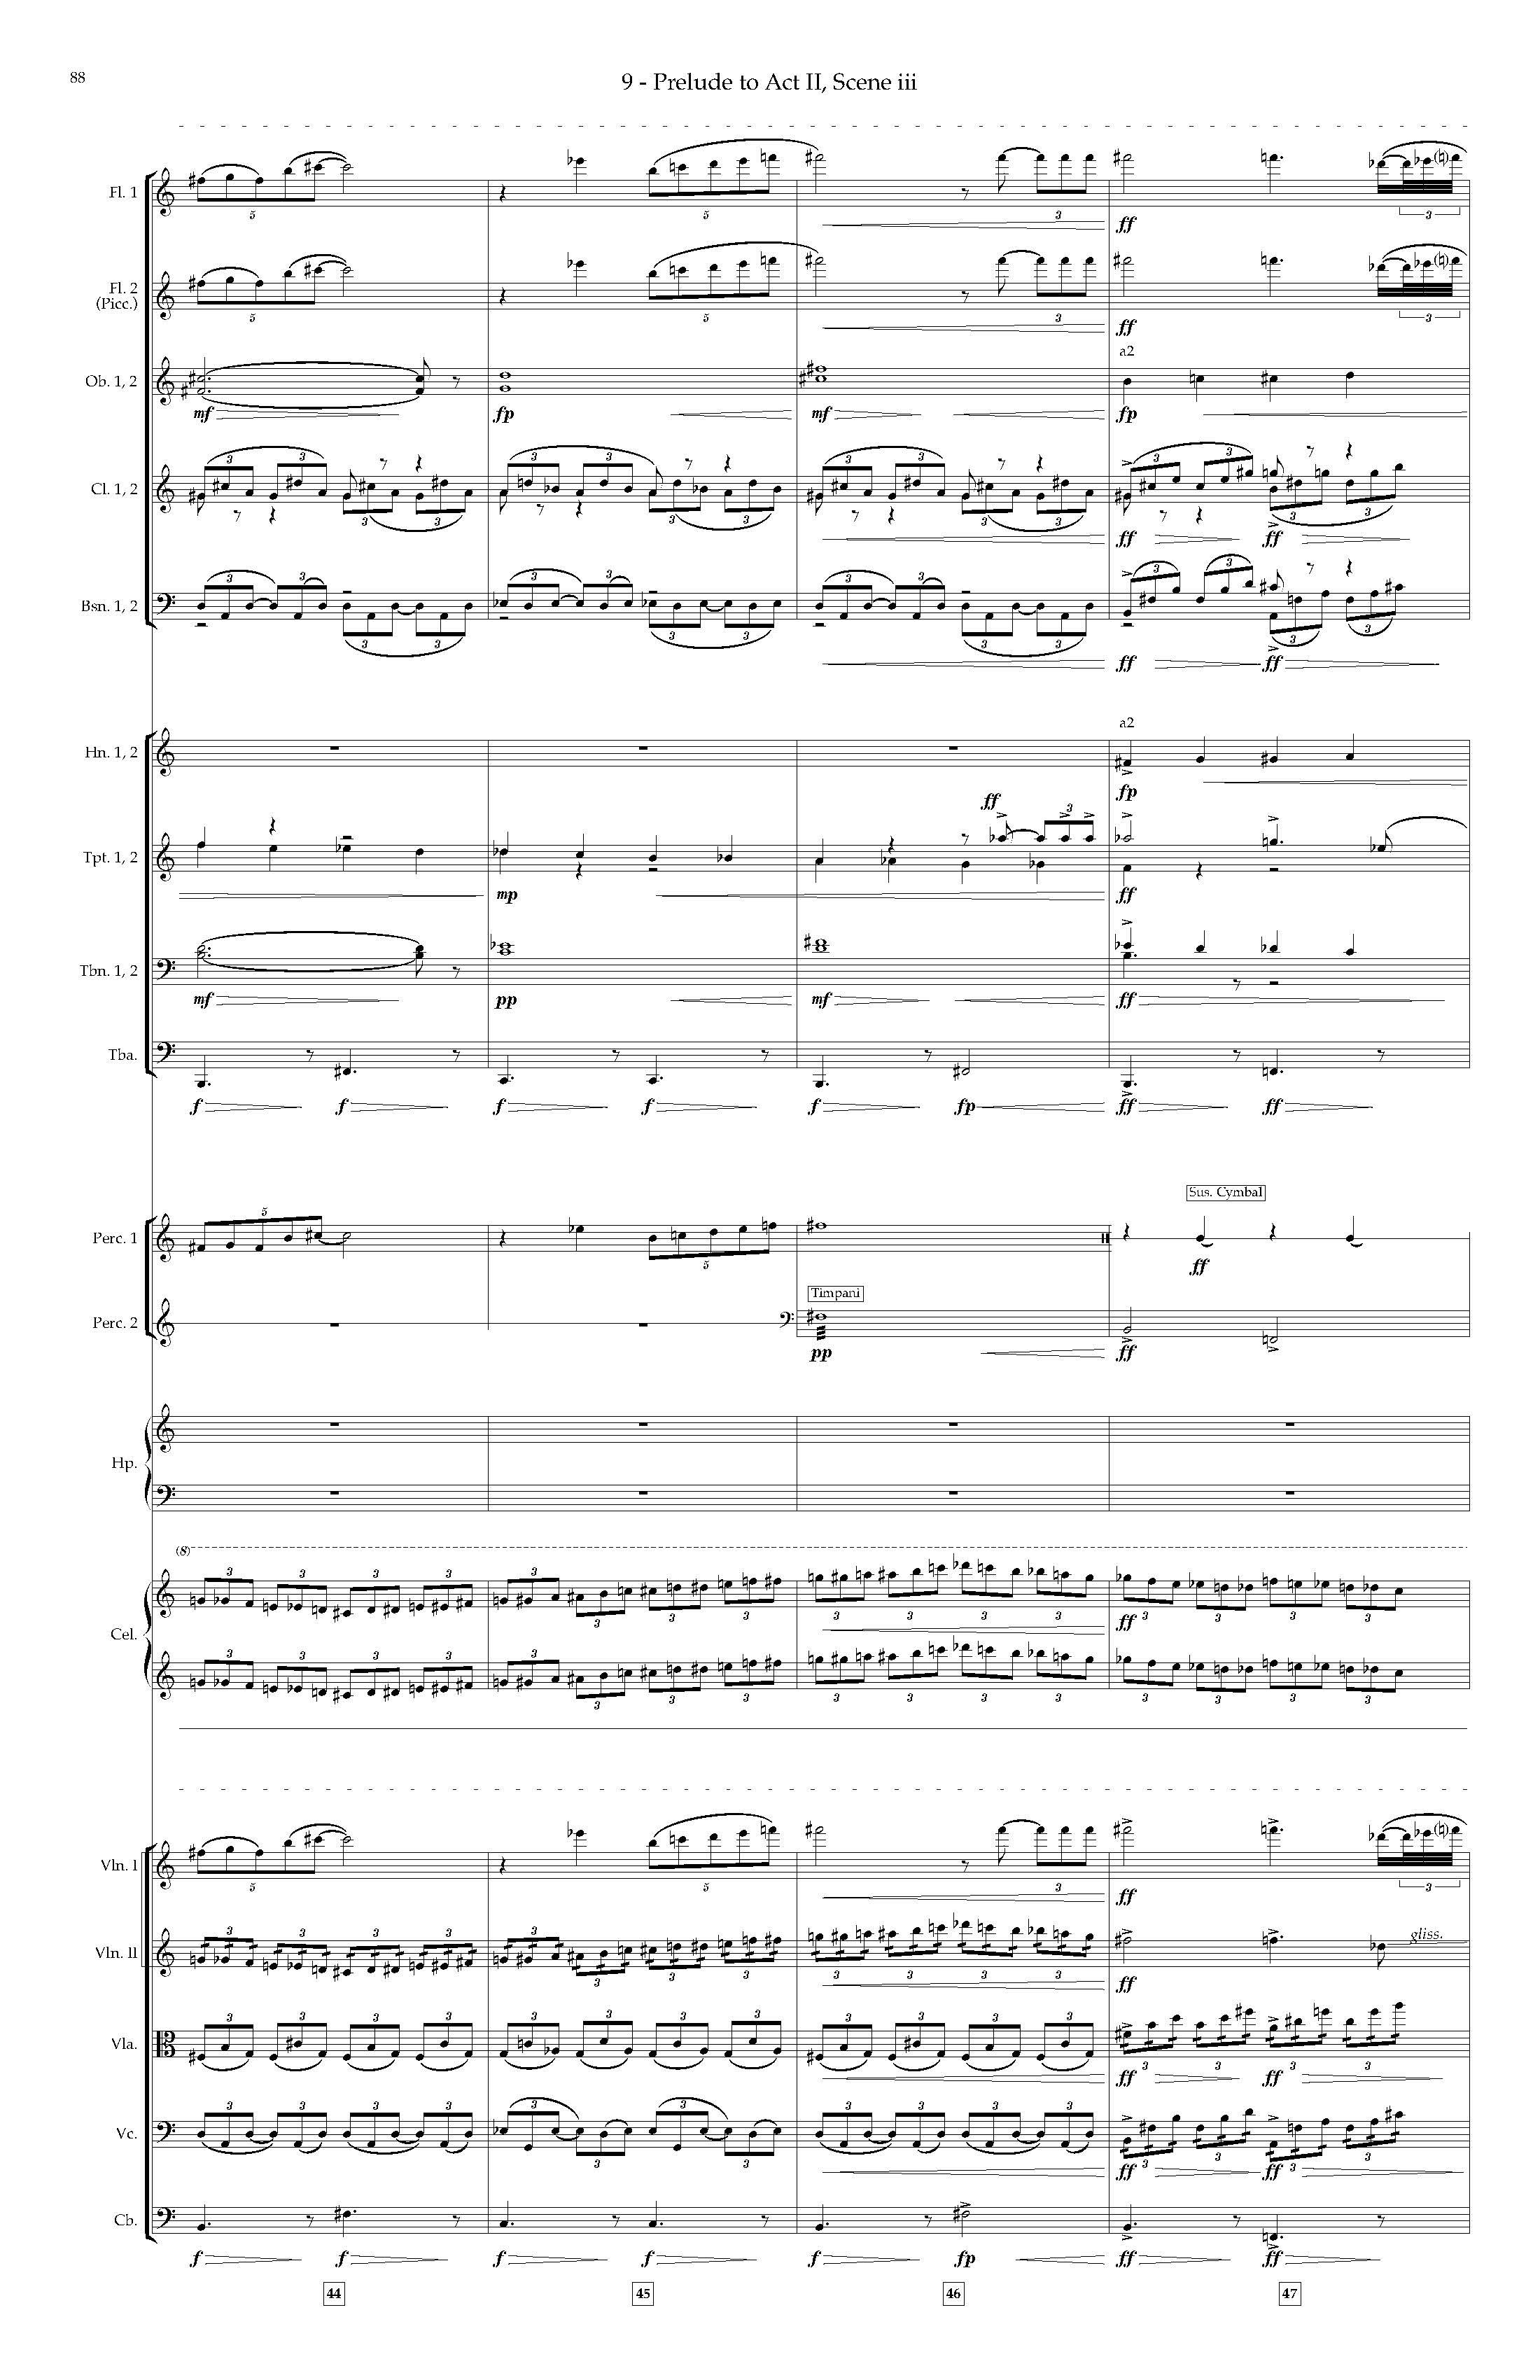 Arias and Interludes from HWGS - Complete Score_Page_94.jpg